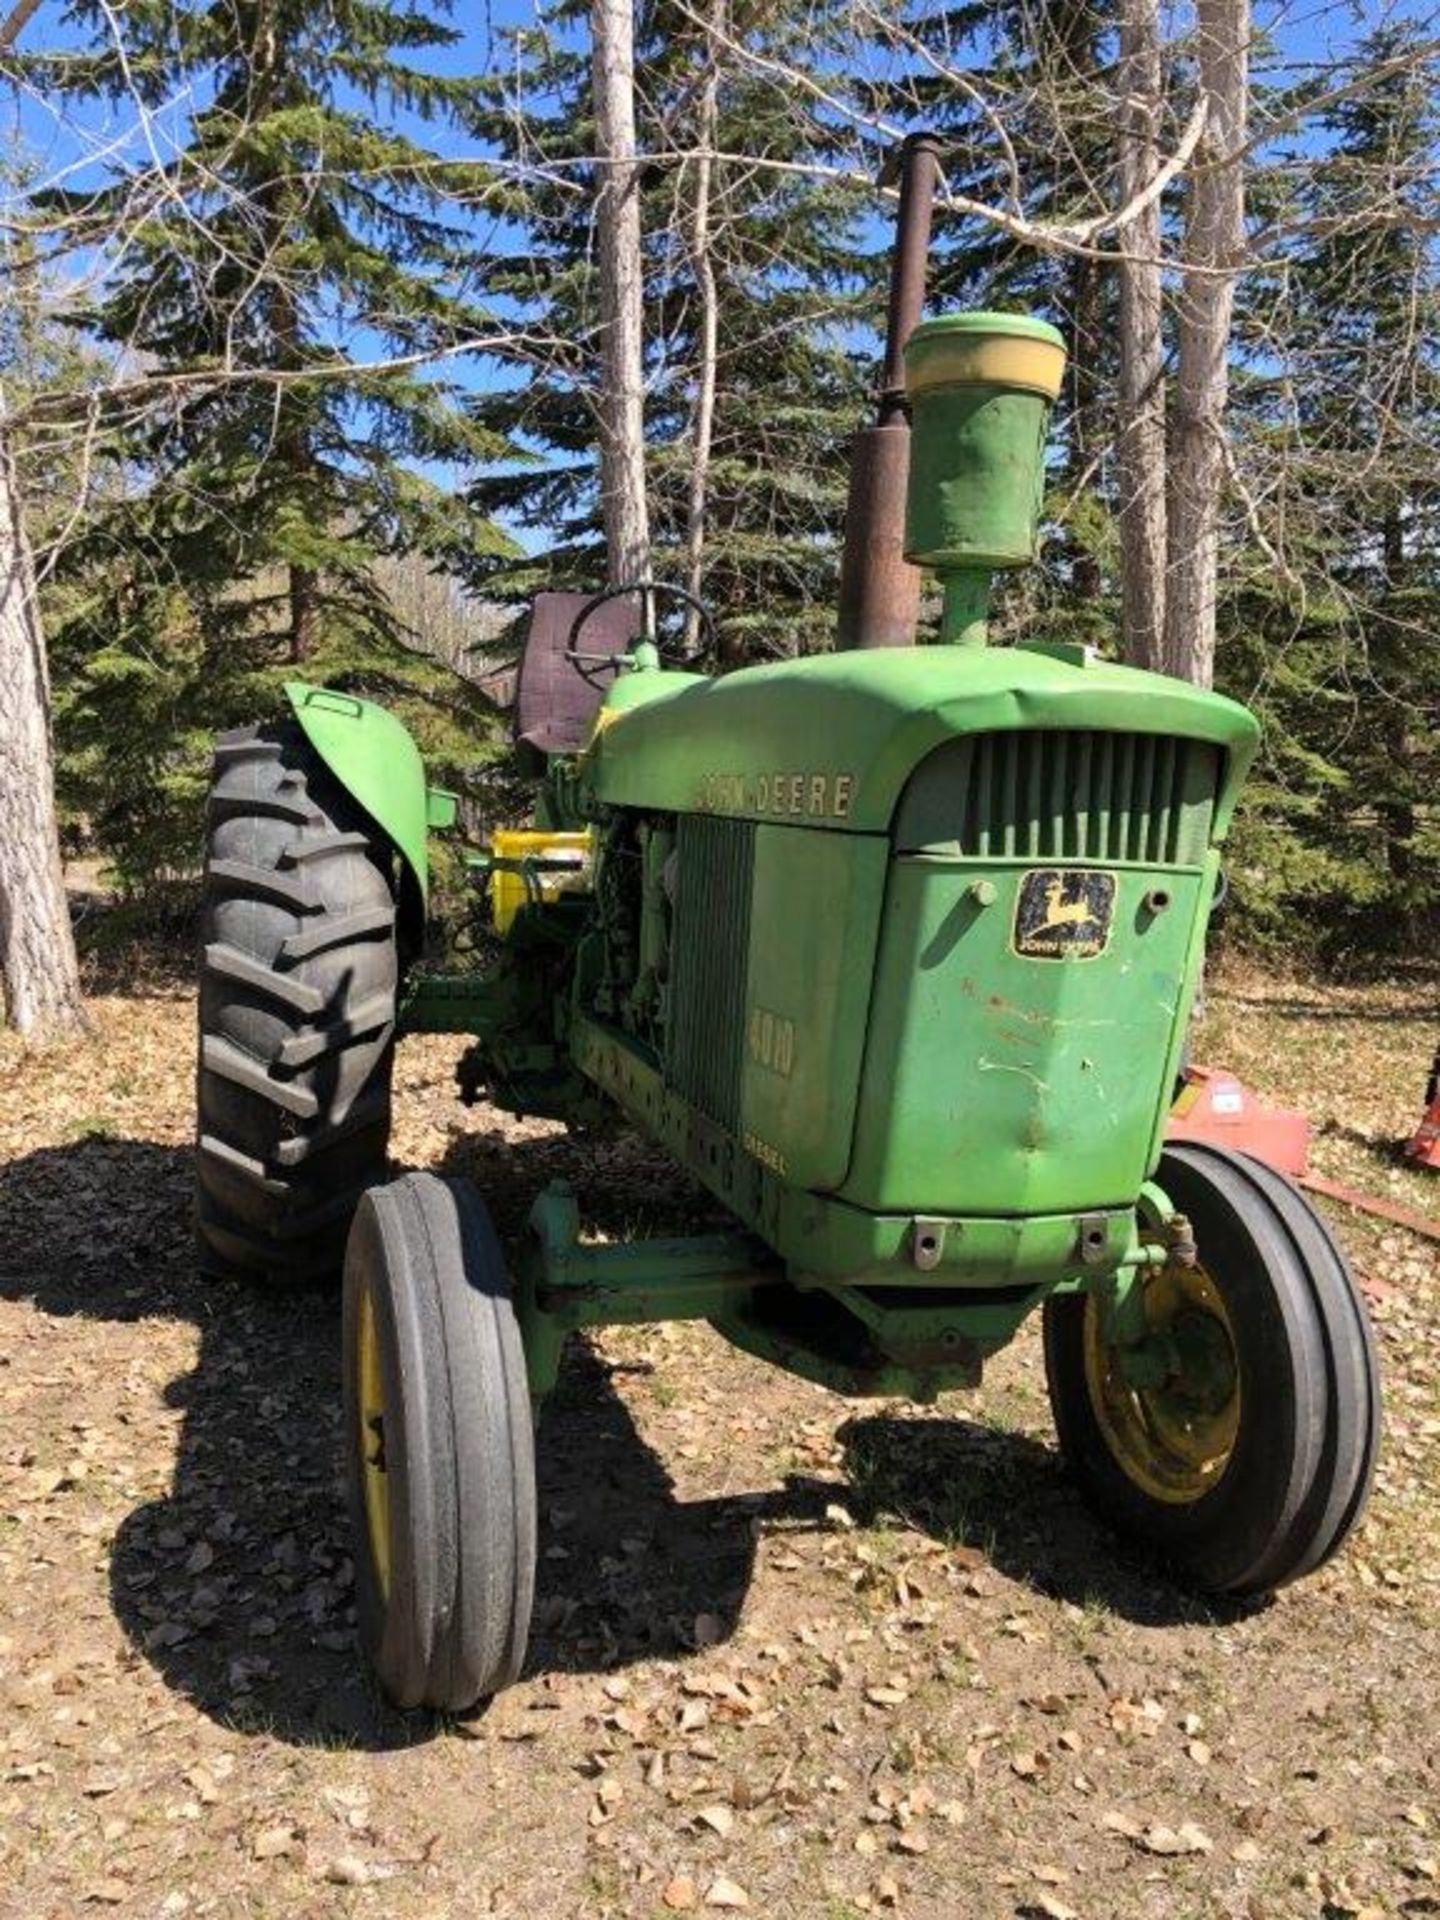 JOHN DEERE 4010 TRACTOR, DIESEL, 2WD, 18.4-34 R1 RUBBER (GOOD CONDITION), 540 PTO, S/N 401022T3600 - Image 5 of 14